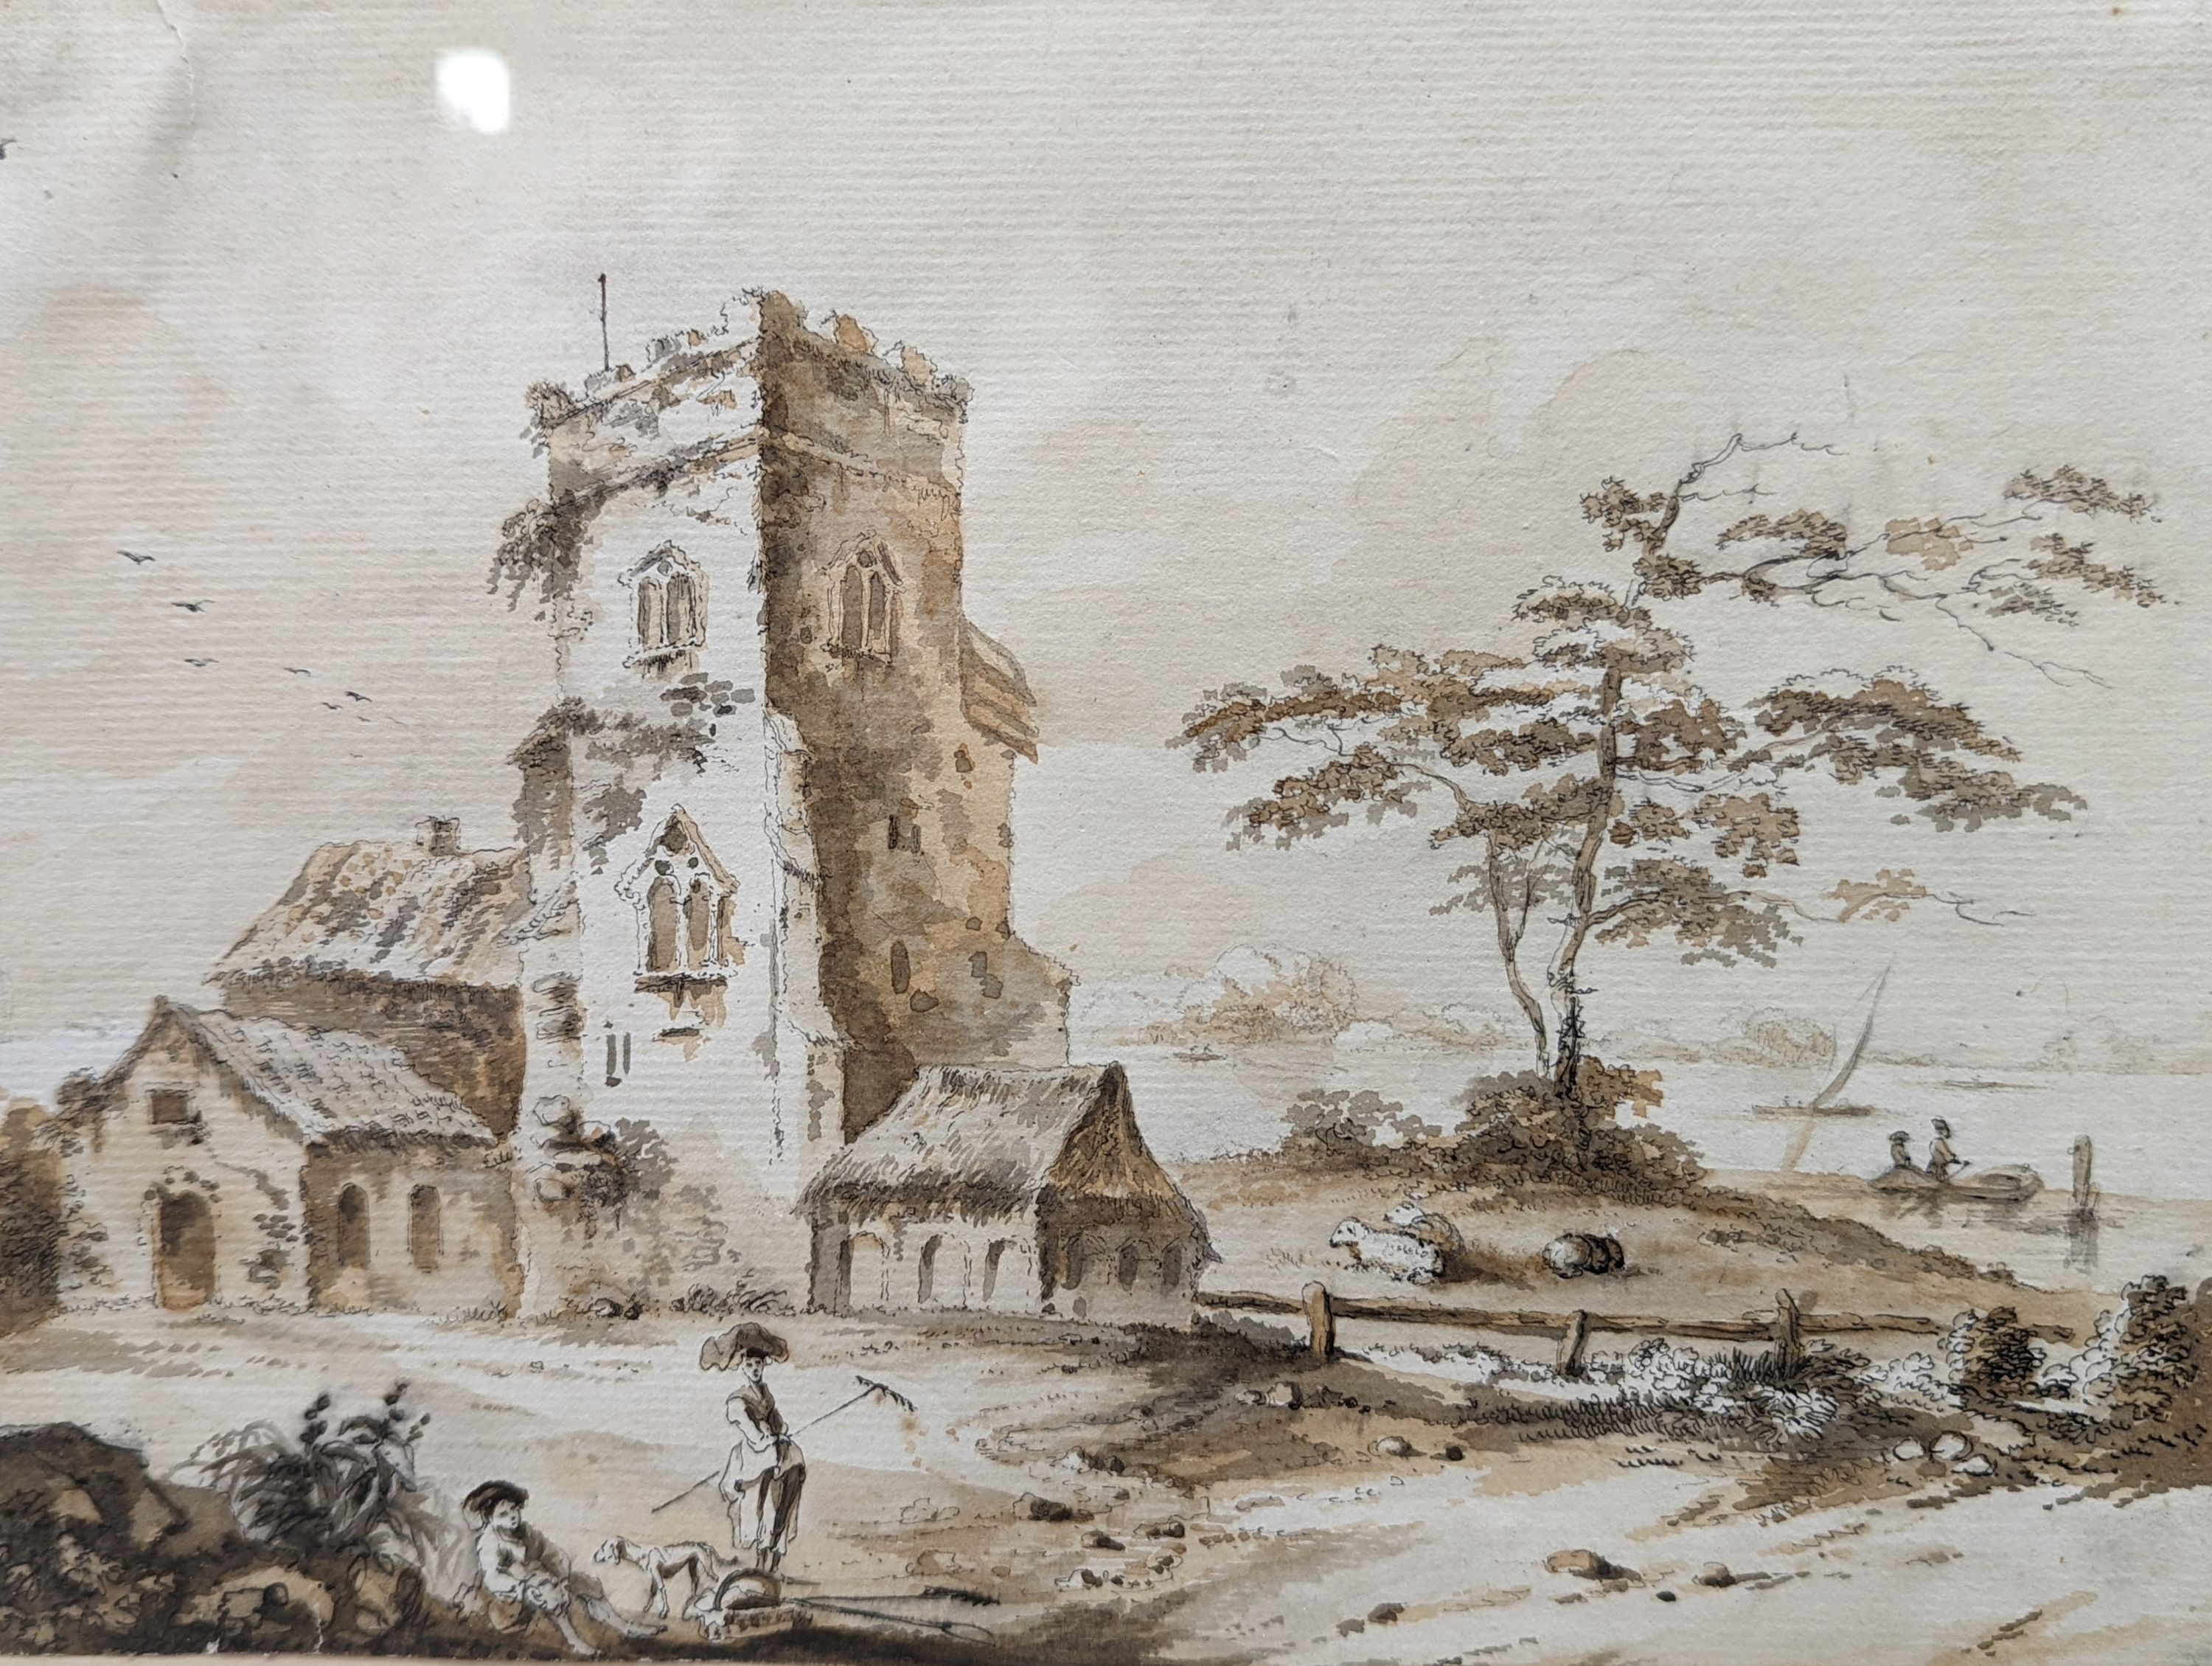 Attributed to William Austin (1721-1820), ink and watercolour, 'Millbrook Church, Southampton', inscribed verso, 18 x 25cm